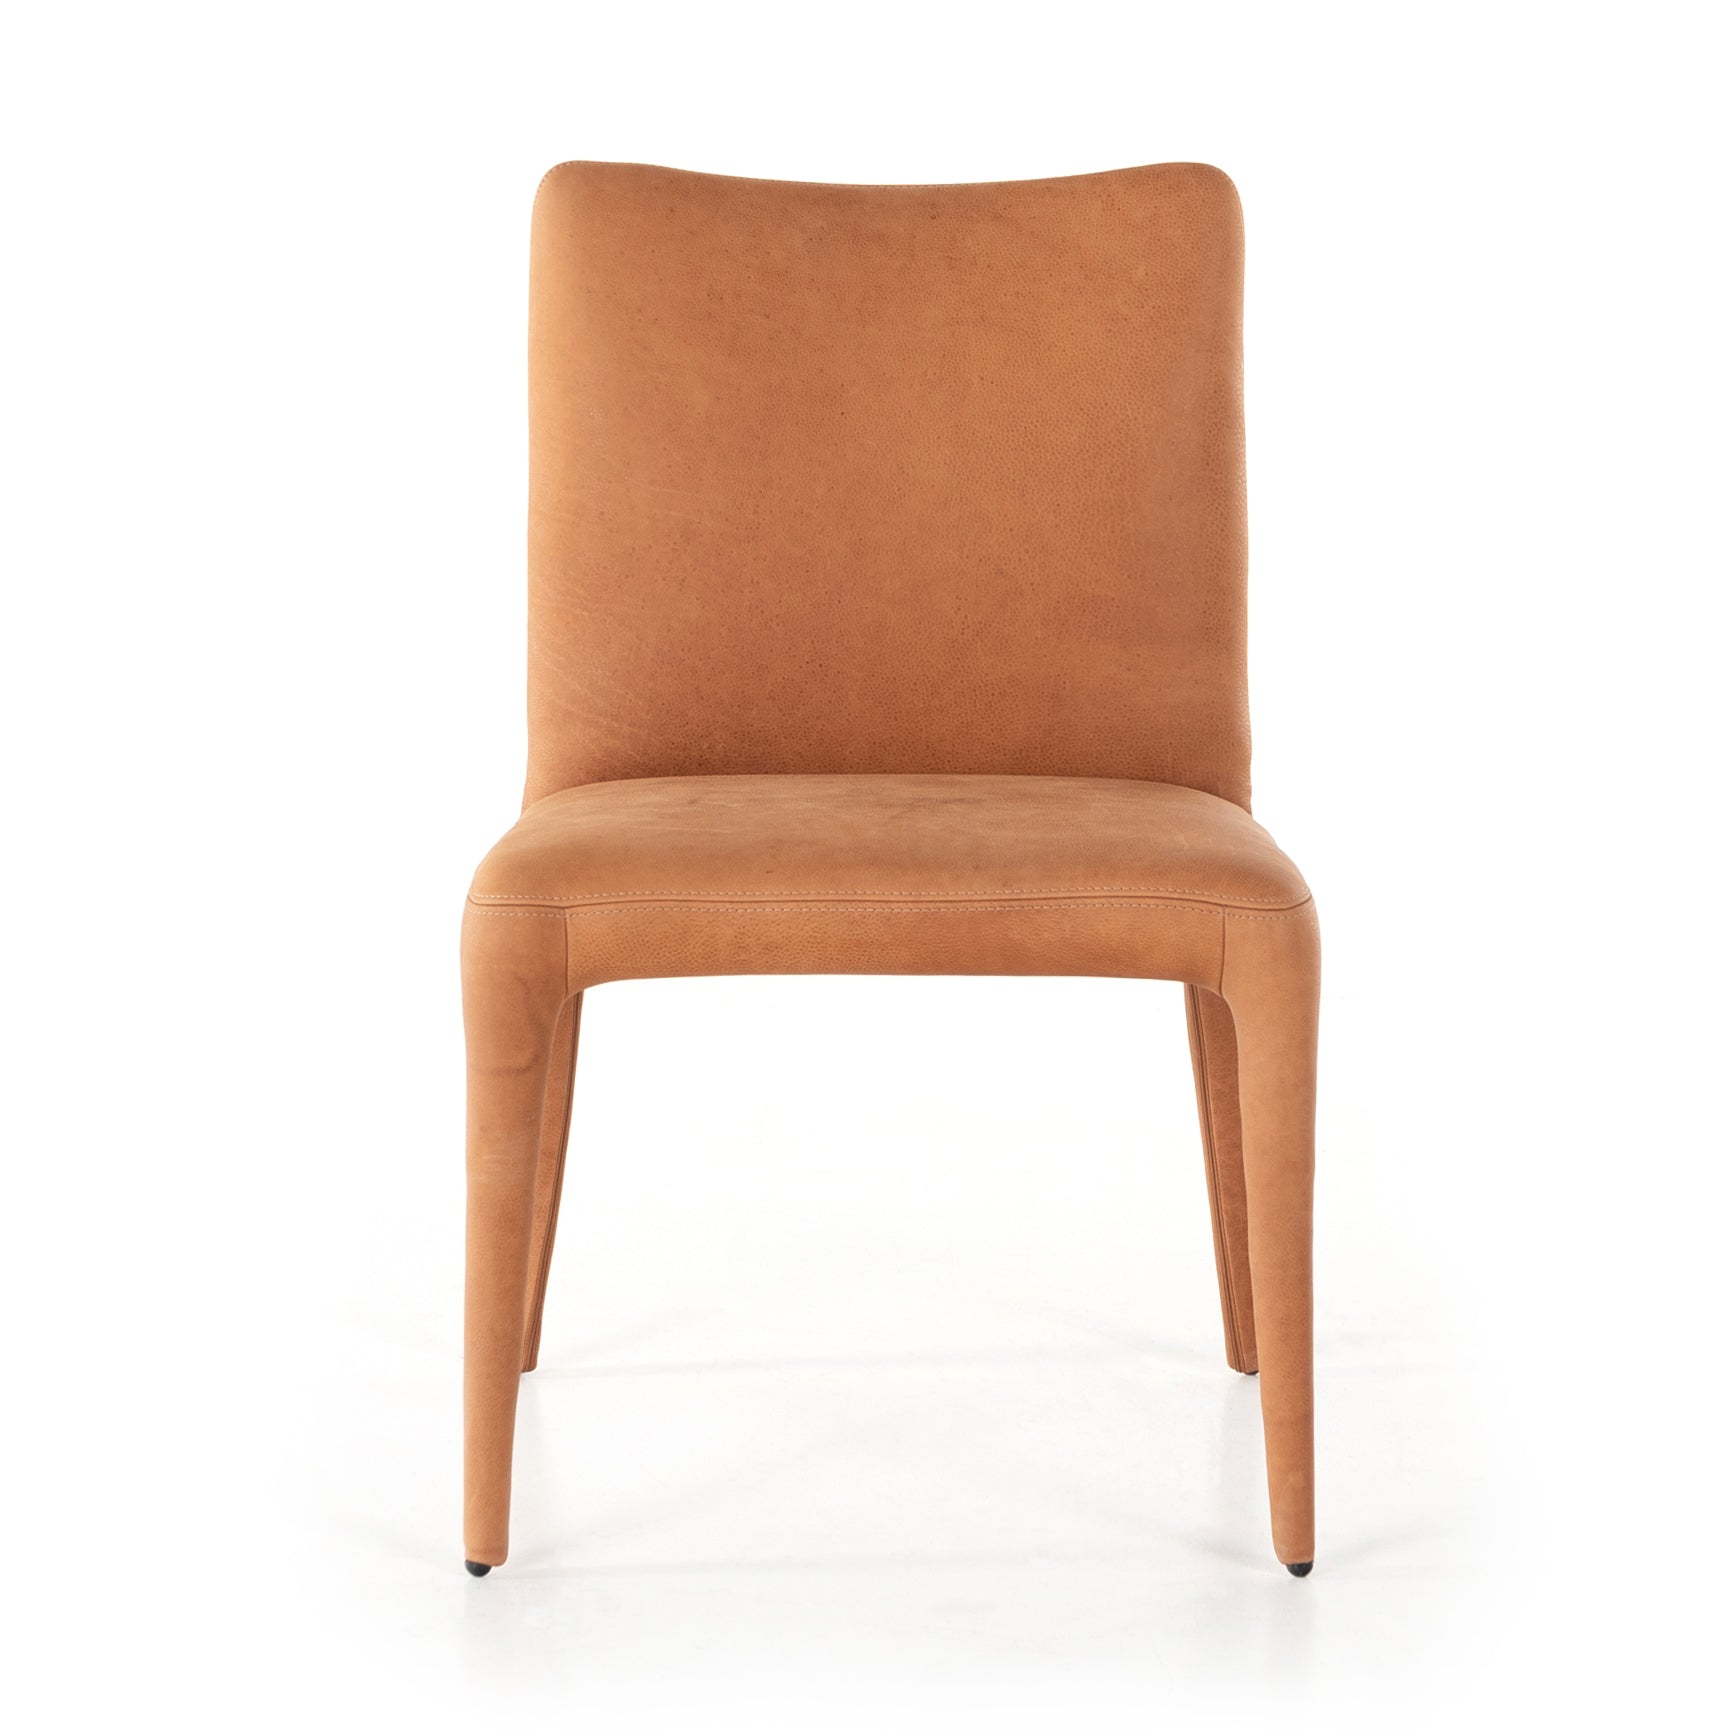 MADISON DINING CHAIR